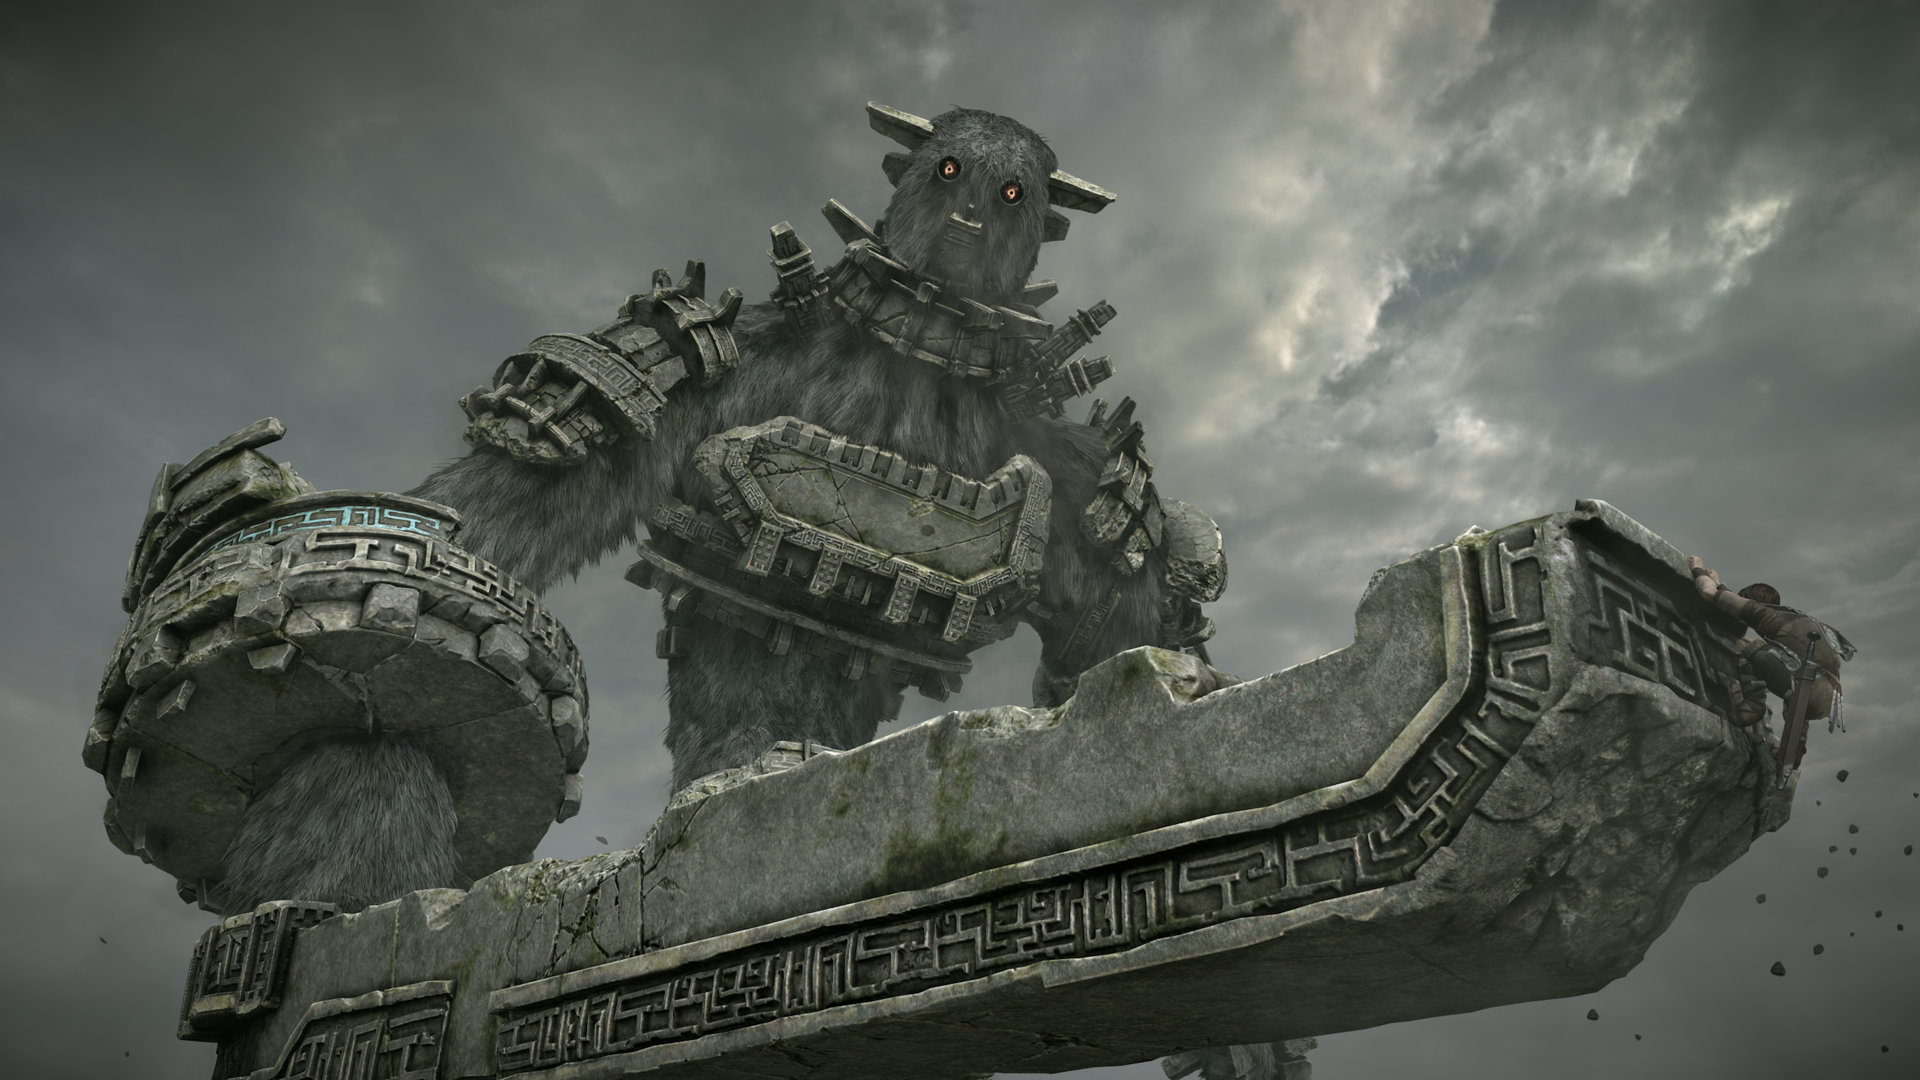 Shadow of the Colossus remake uses 'original game code